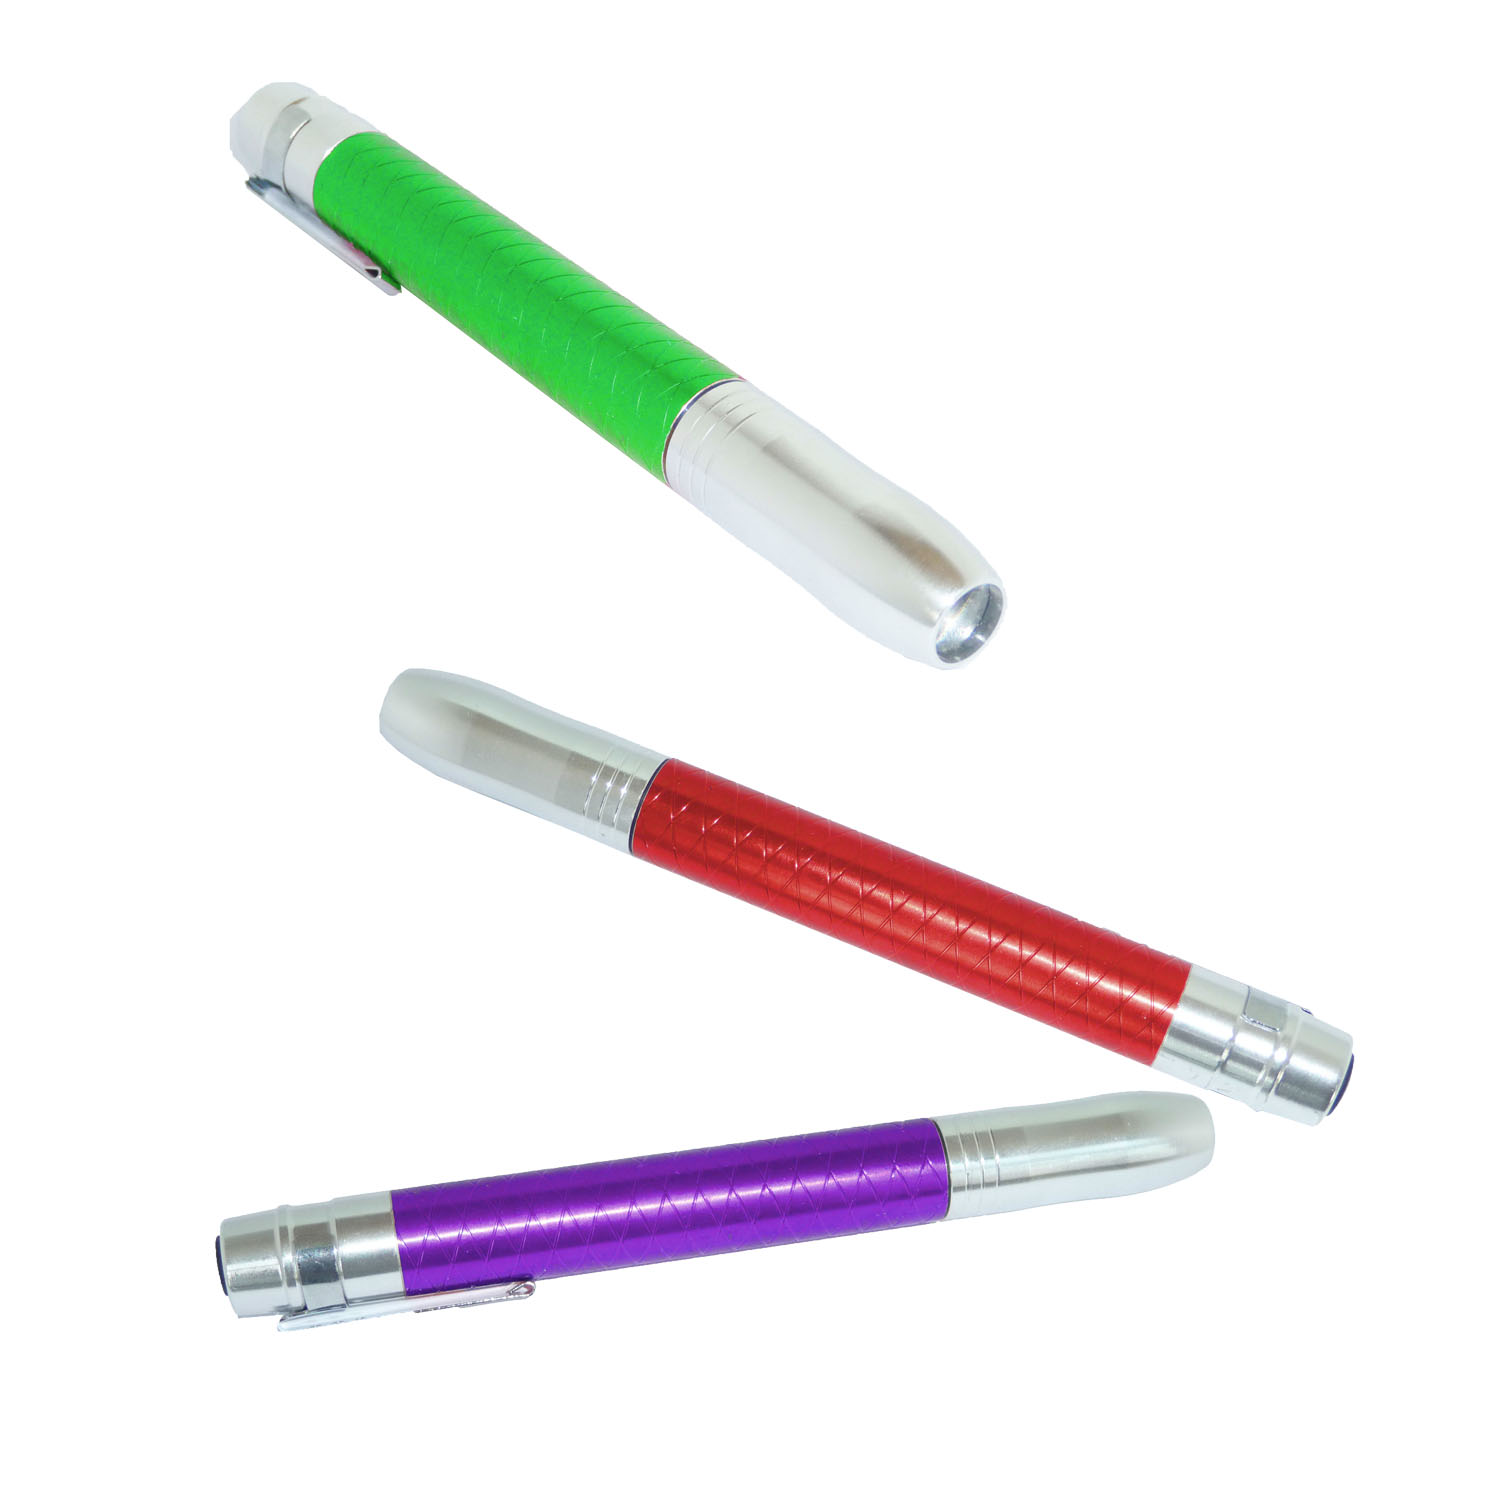 GL-AAA1305 Aluminum Medical Penlight for Doctor and Nurse